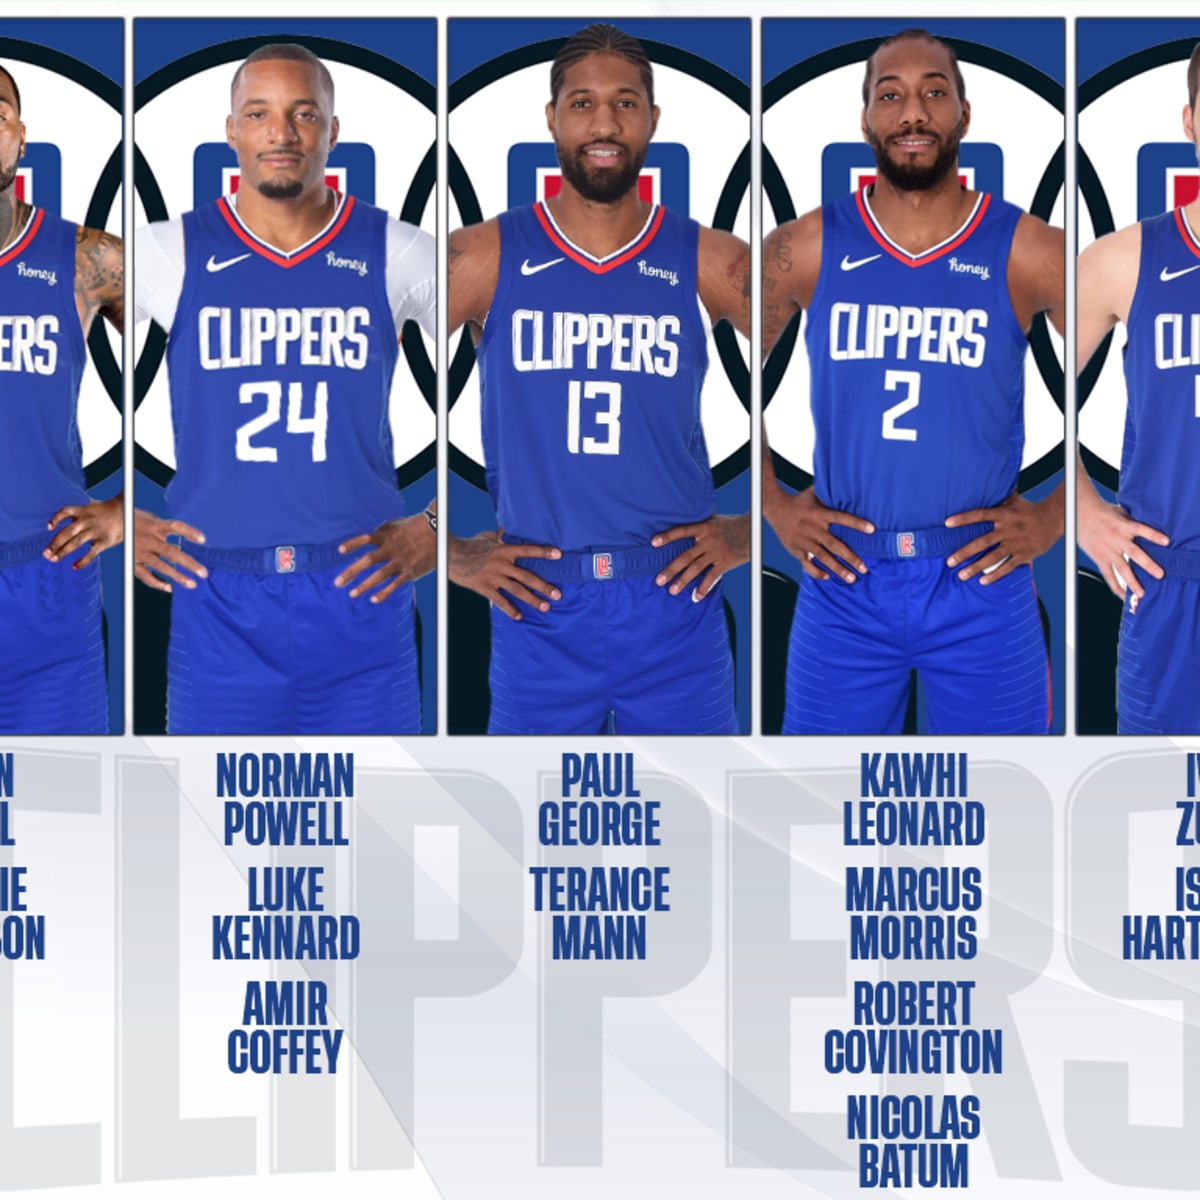 2022-2023 Los Angeles Clippers roster: Ranking the best players